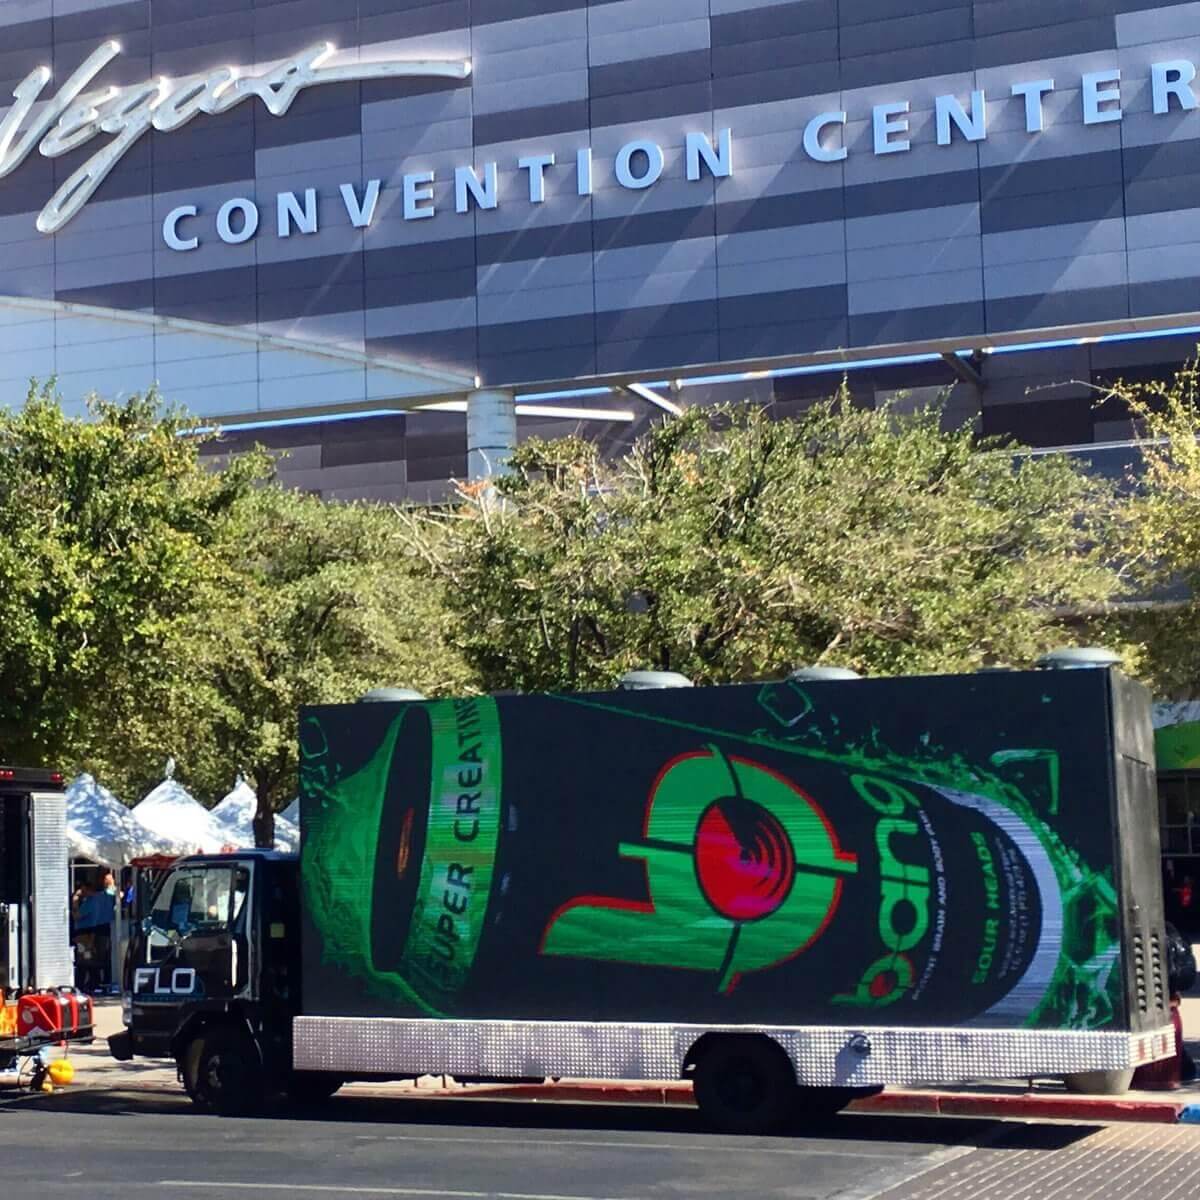 Effective mobile advertising captivates audiences soon to come out of this convention center